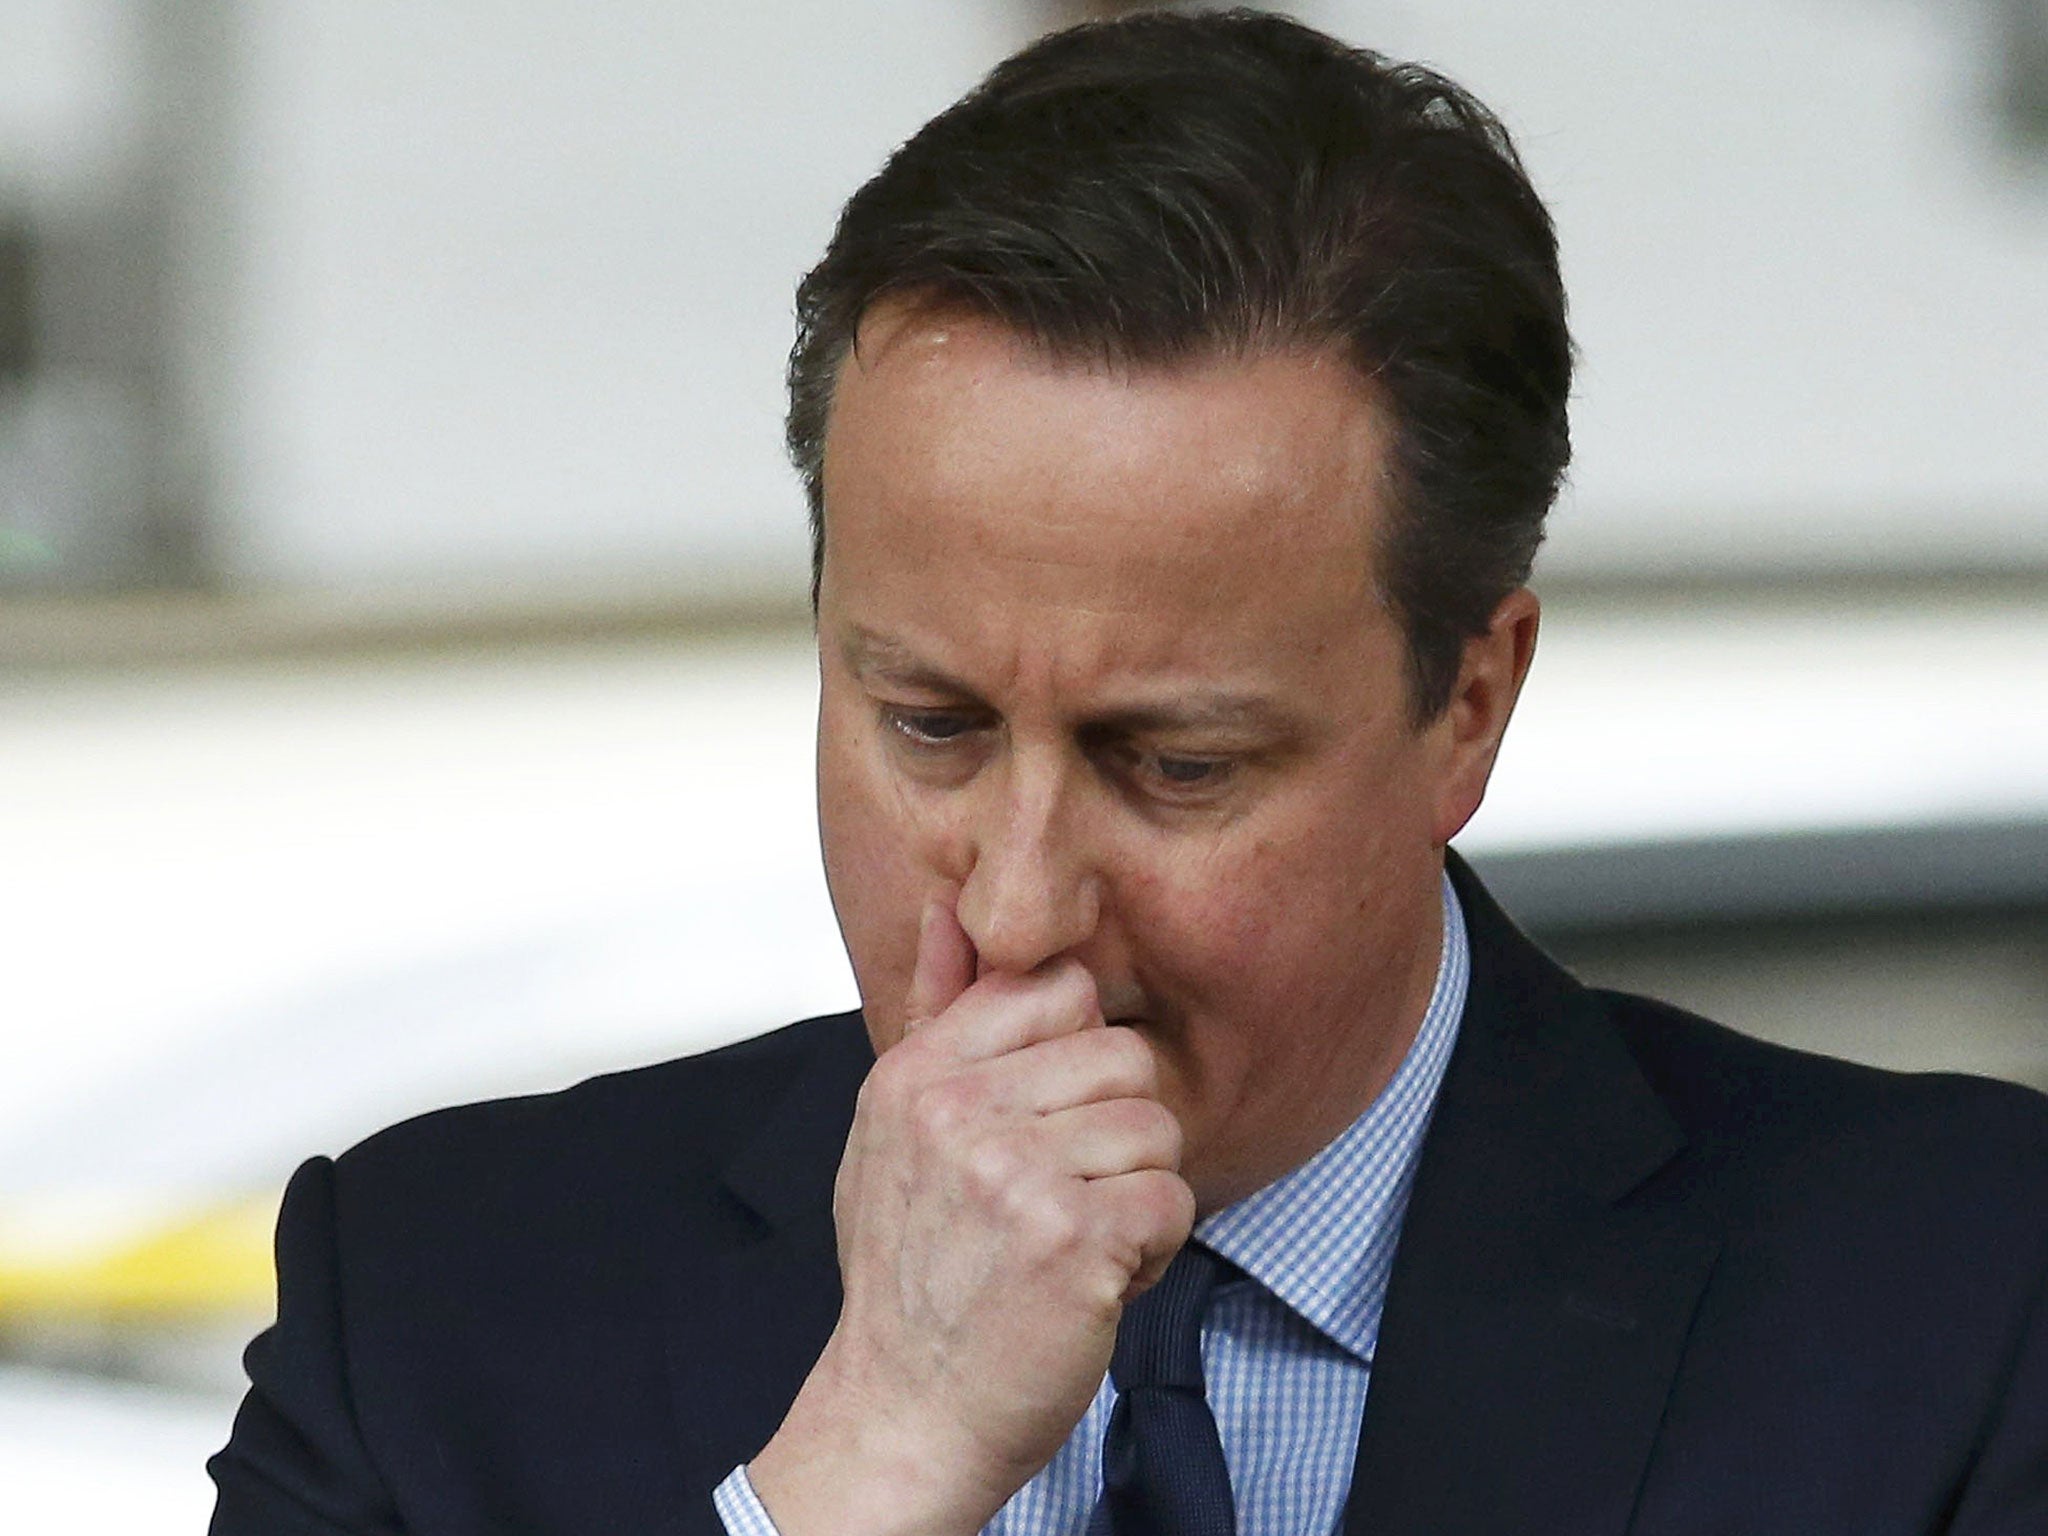 David Cameron is yet to personally comment on the reports